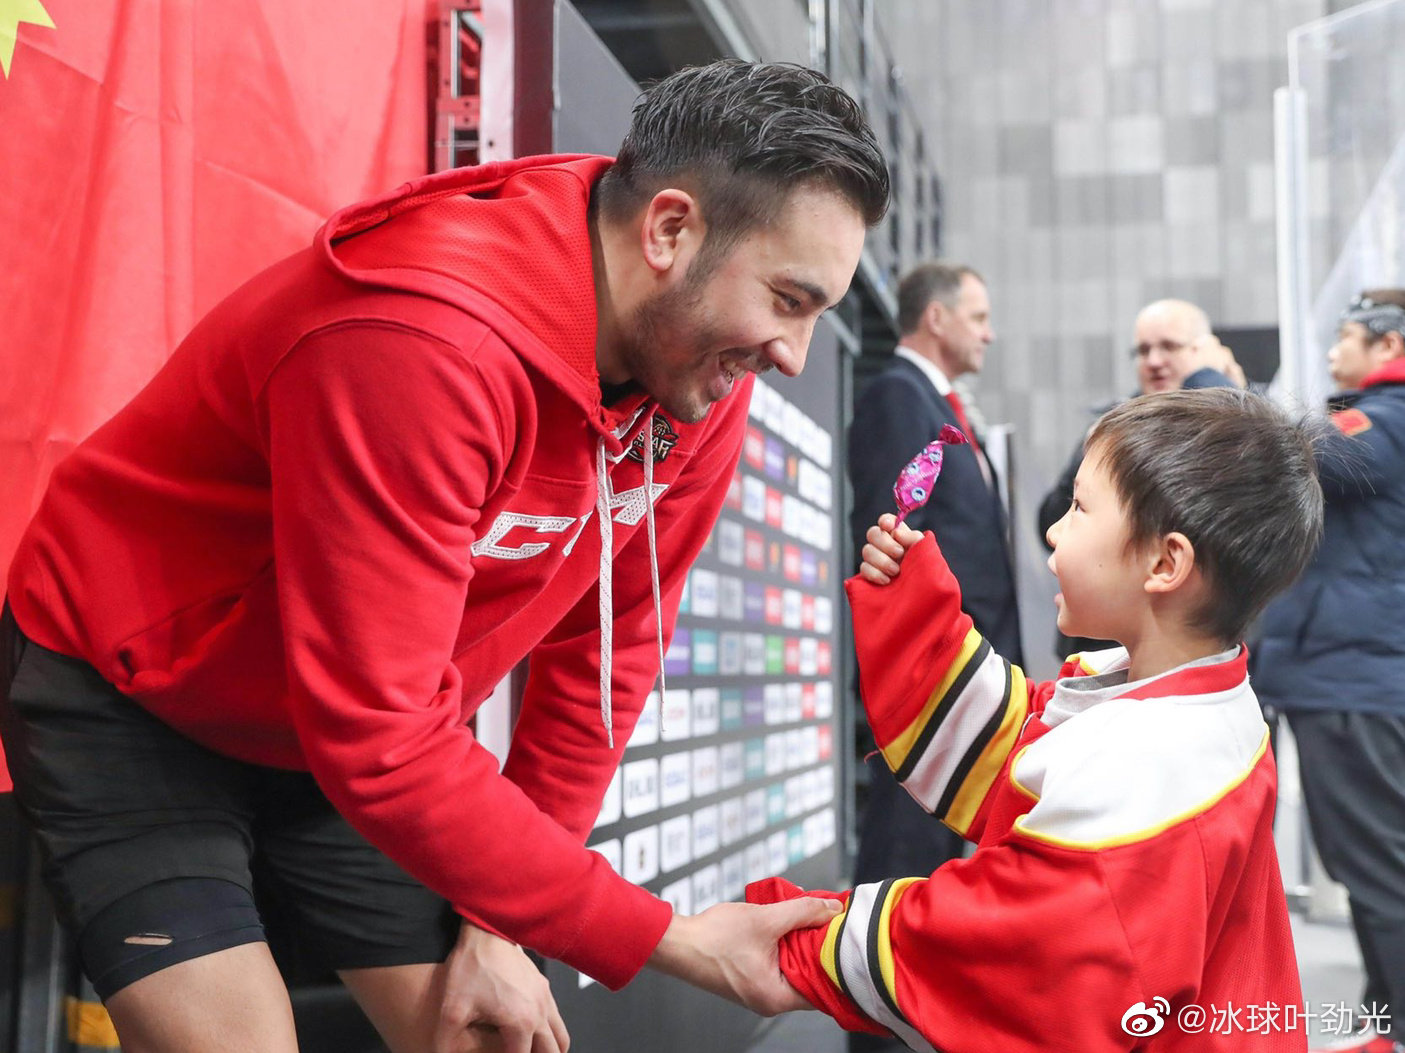 Chinese ice hockey team captain Brandon Yip (left) talks to a young fan at the Beijing Winter Olympic Games at the Capital Indoor Stadium. Photo: Weibo / Ye Jinguang   